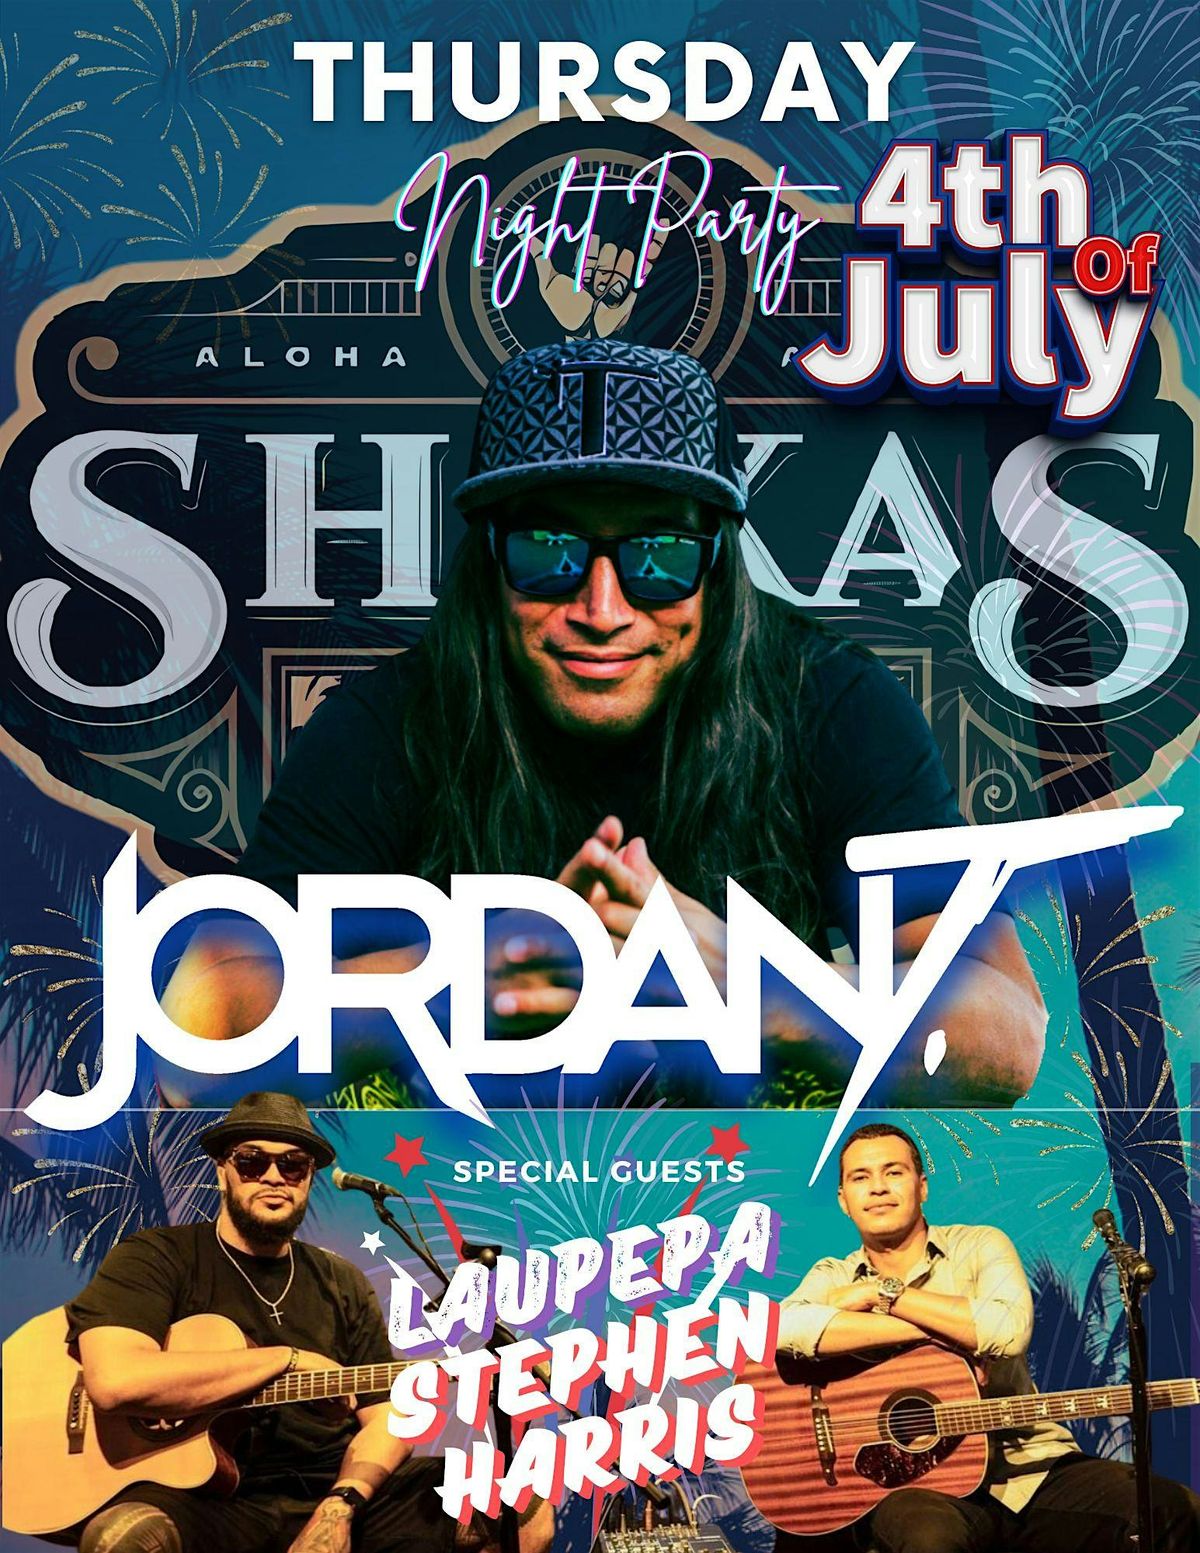 Jordan T Music Live at Shaka's Kailua with special guest Laupepa and Stephen Harris